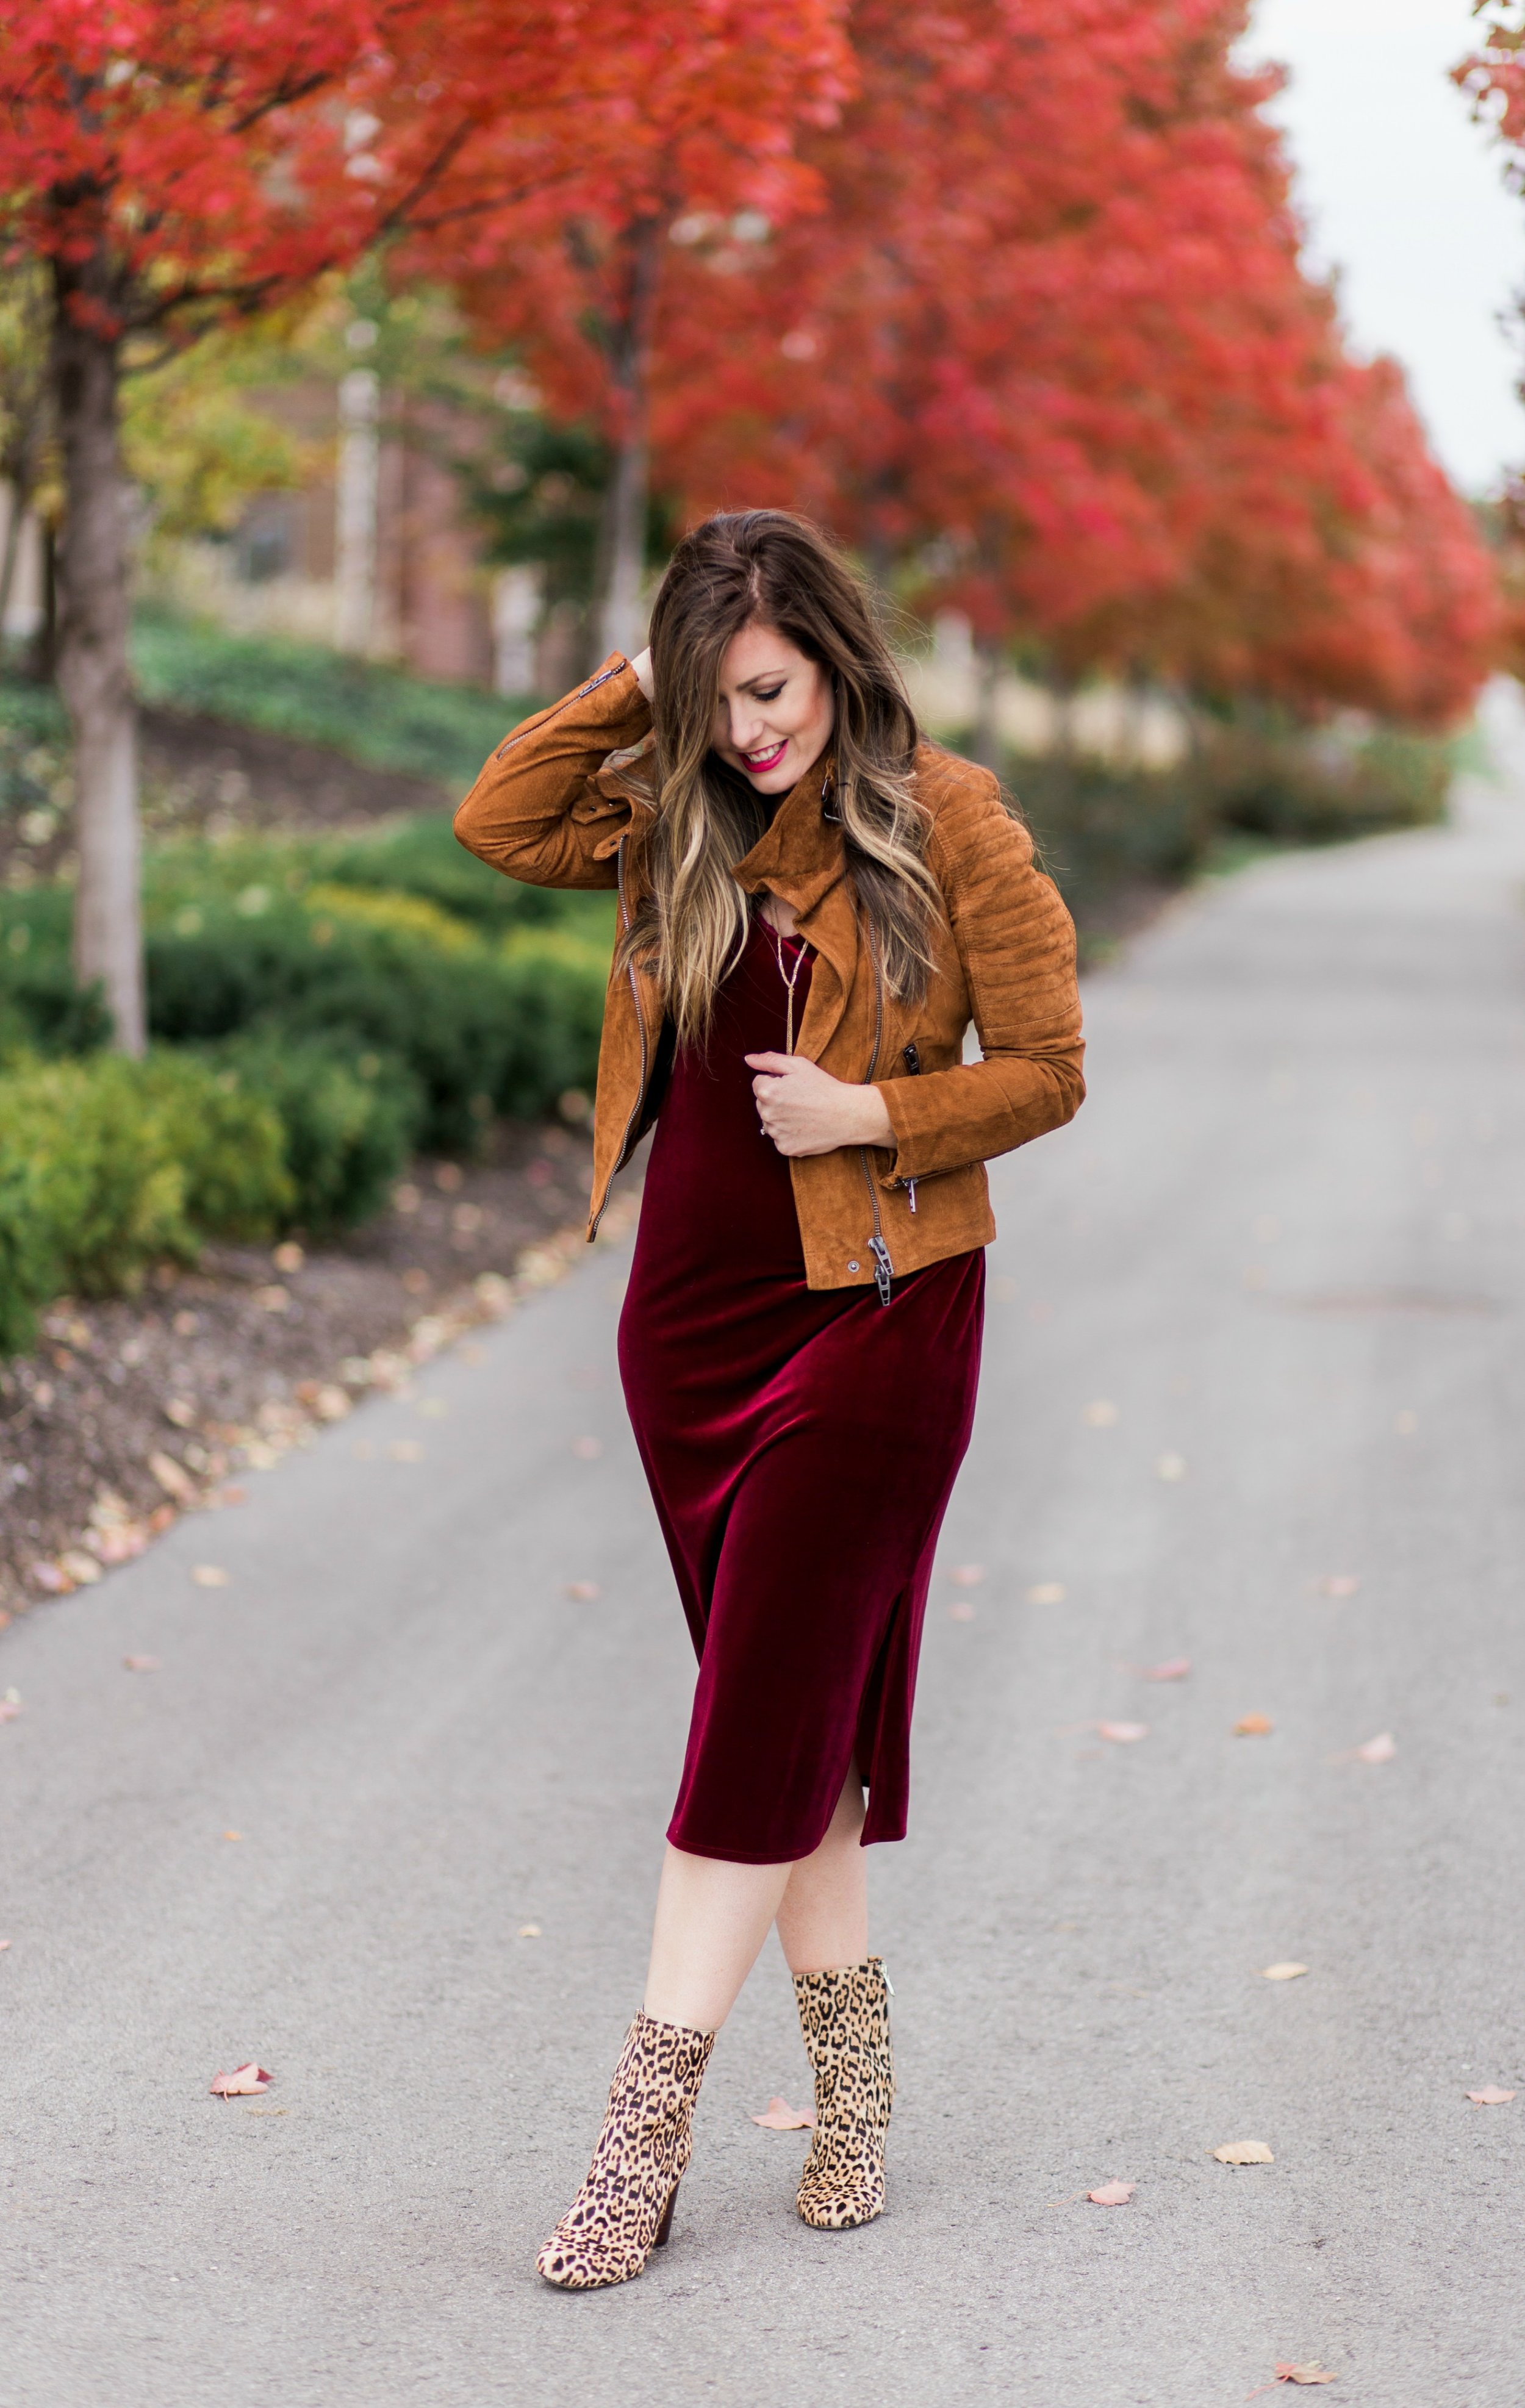 velvet dress outfit with jacket